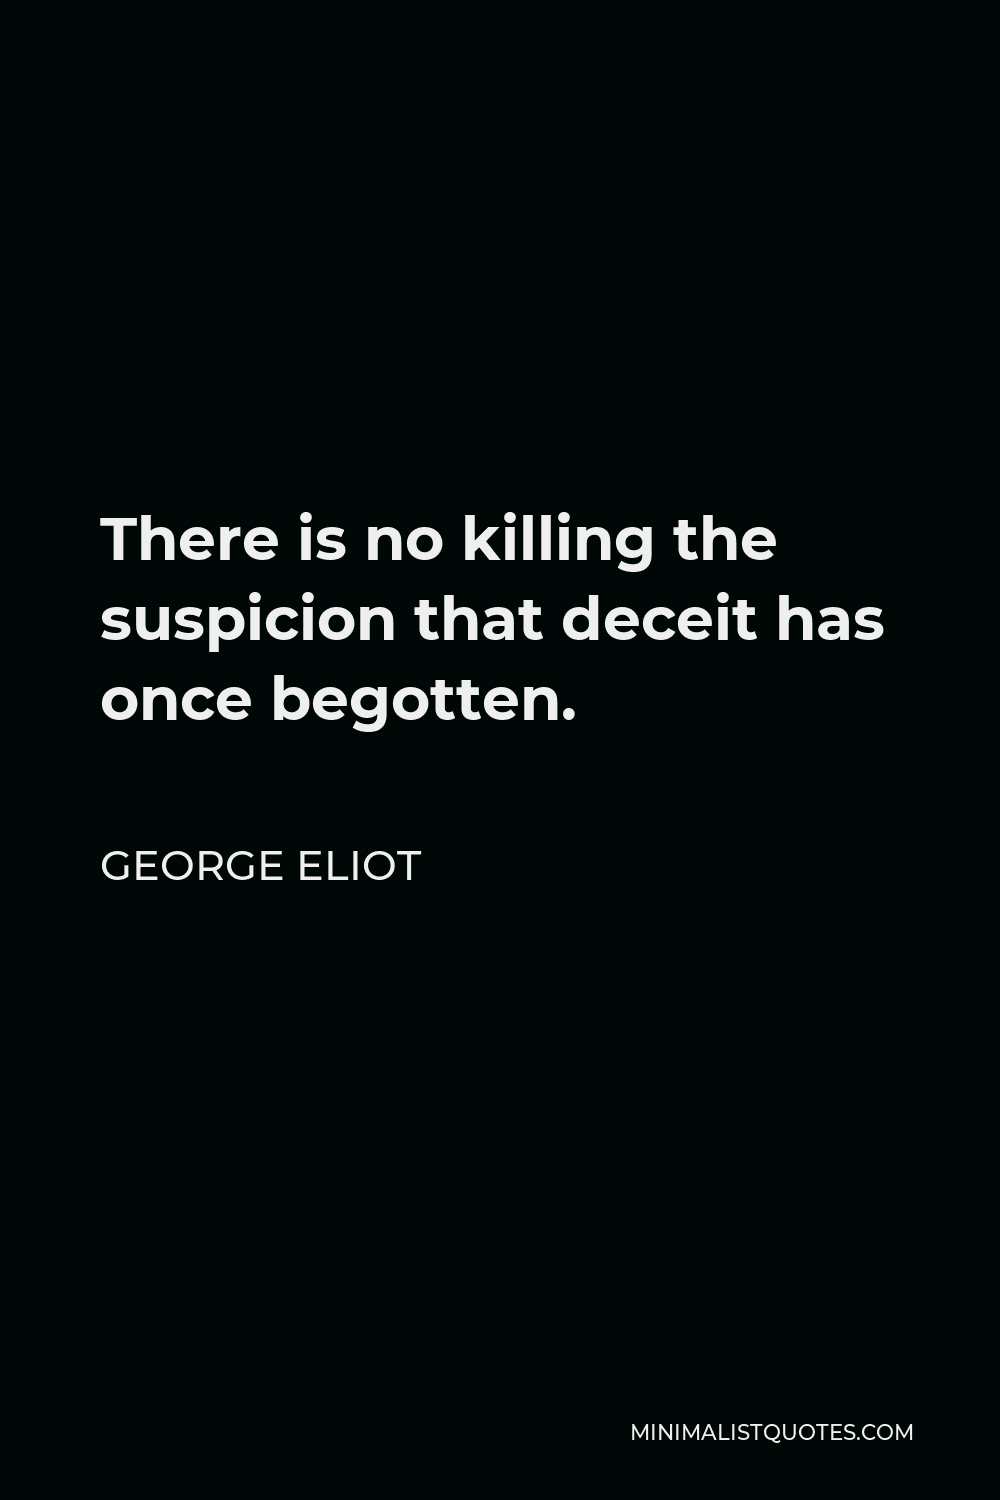 George Eliot Quote - There is no killing the suspicion that deceit has once begotten.